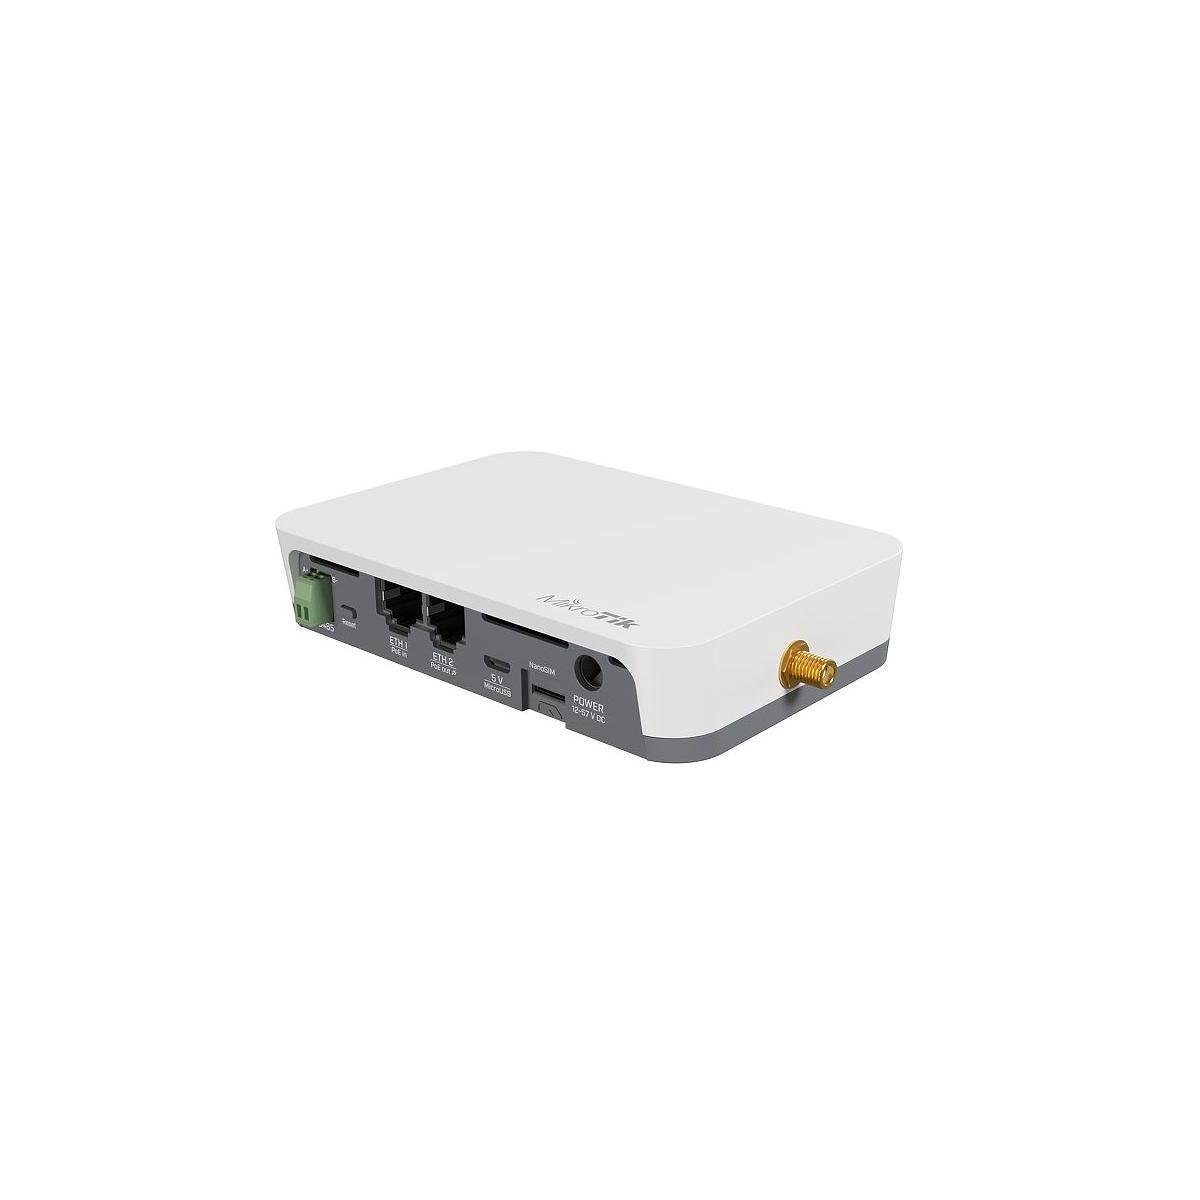 KNOT LR8-Kit,... RB924IR-2ND-BT5&BG77&R11E-LR8 - MikroTik 4G/LTE-Router